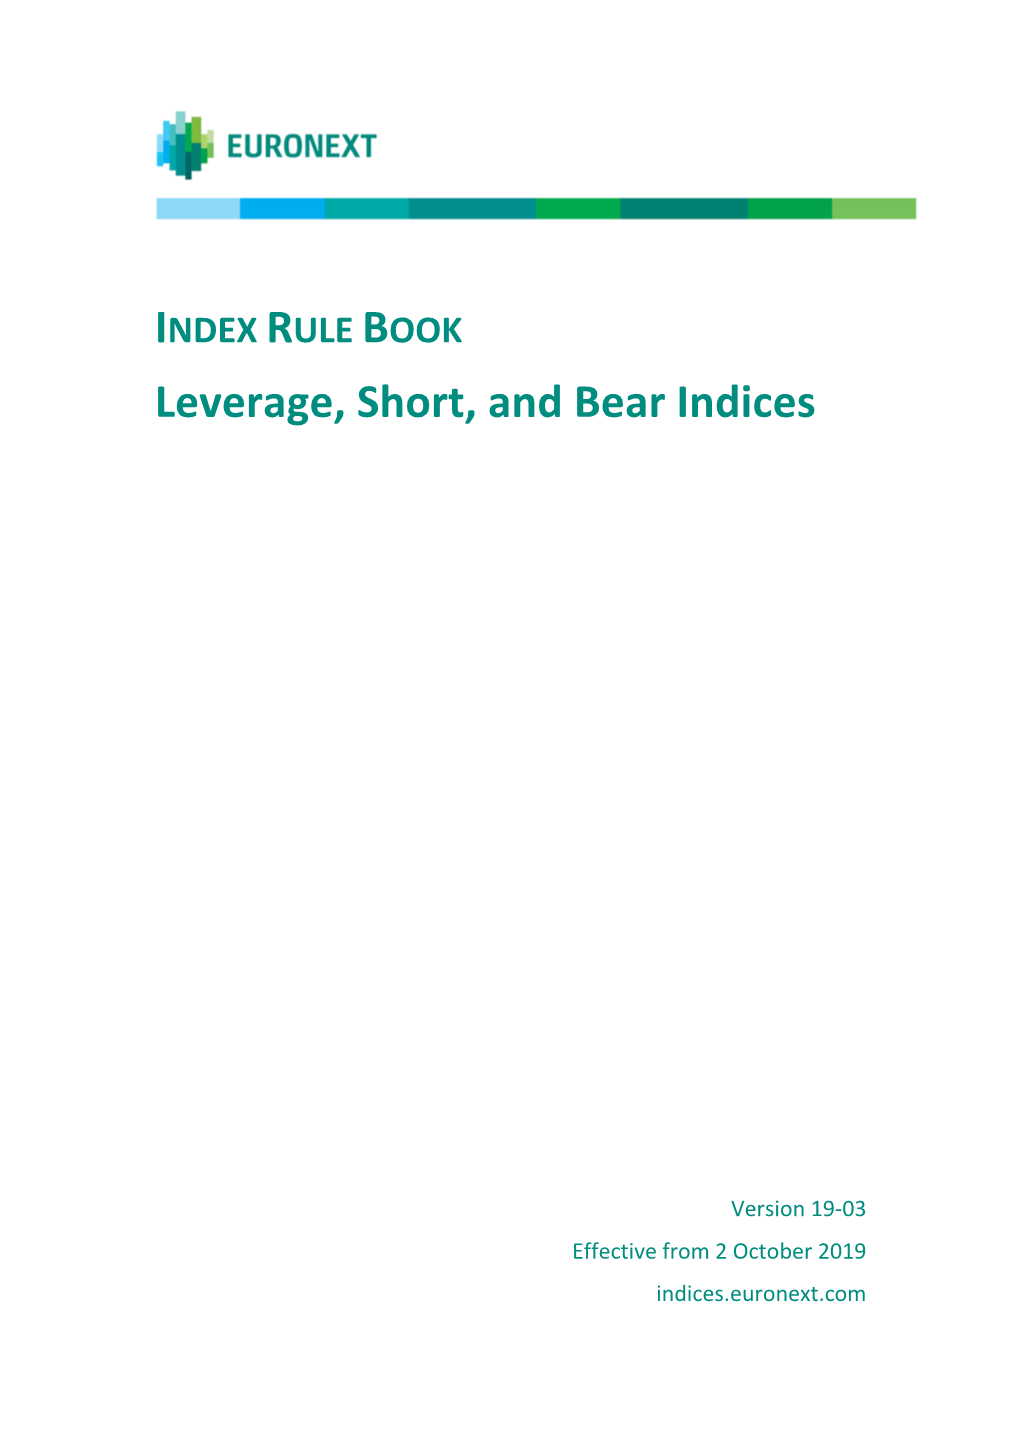 INDEX RULE BOOK Leverage, Short, and Bear Indices